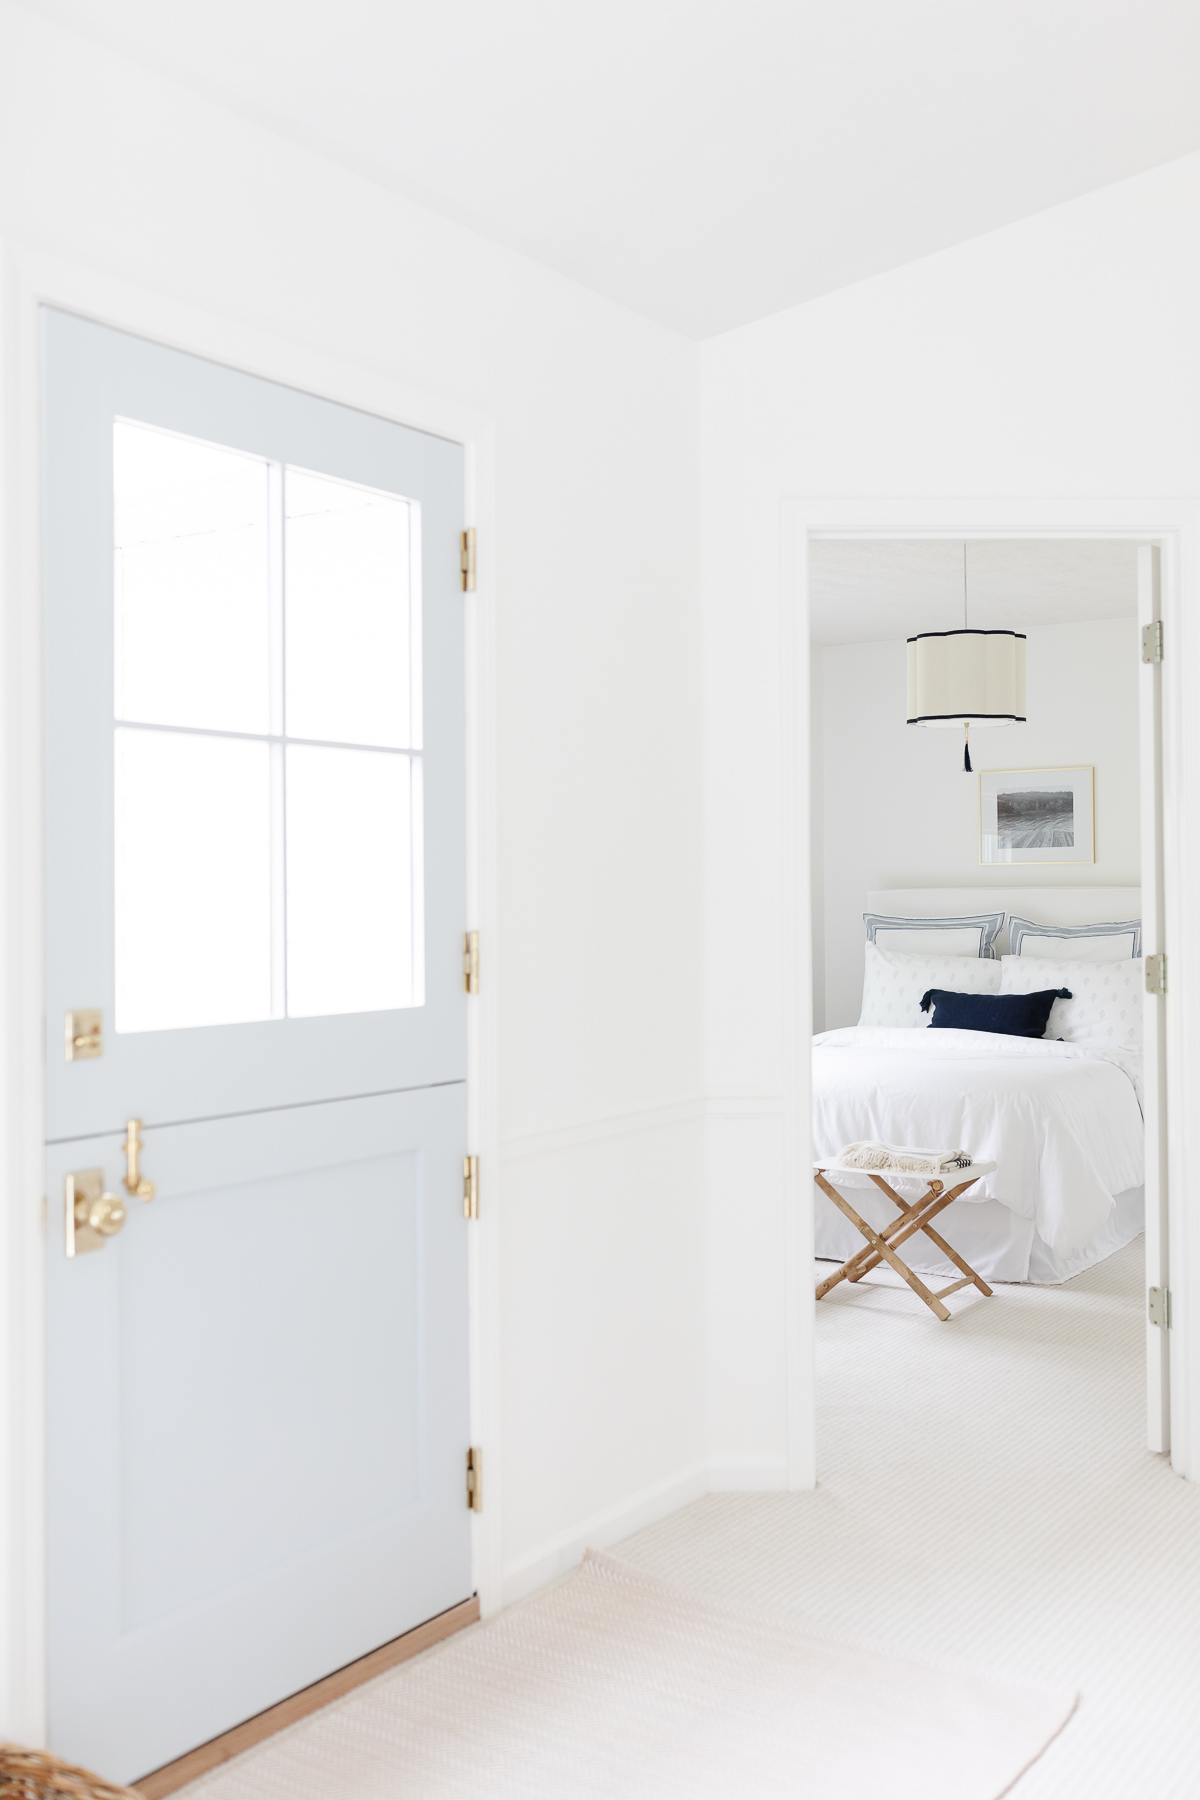 A soft blue Dutch door in an entry of a home with white walls.